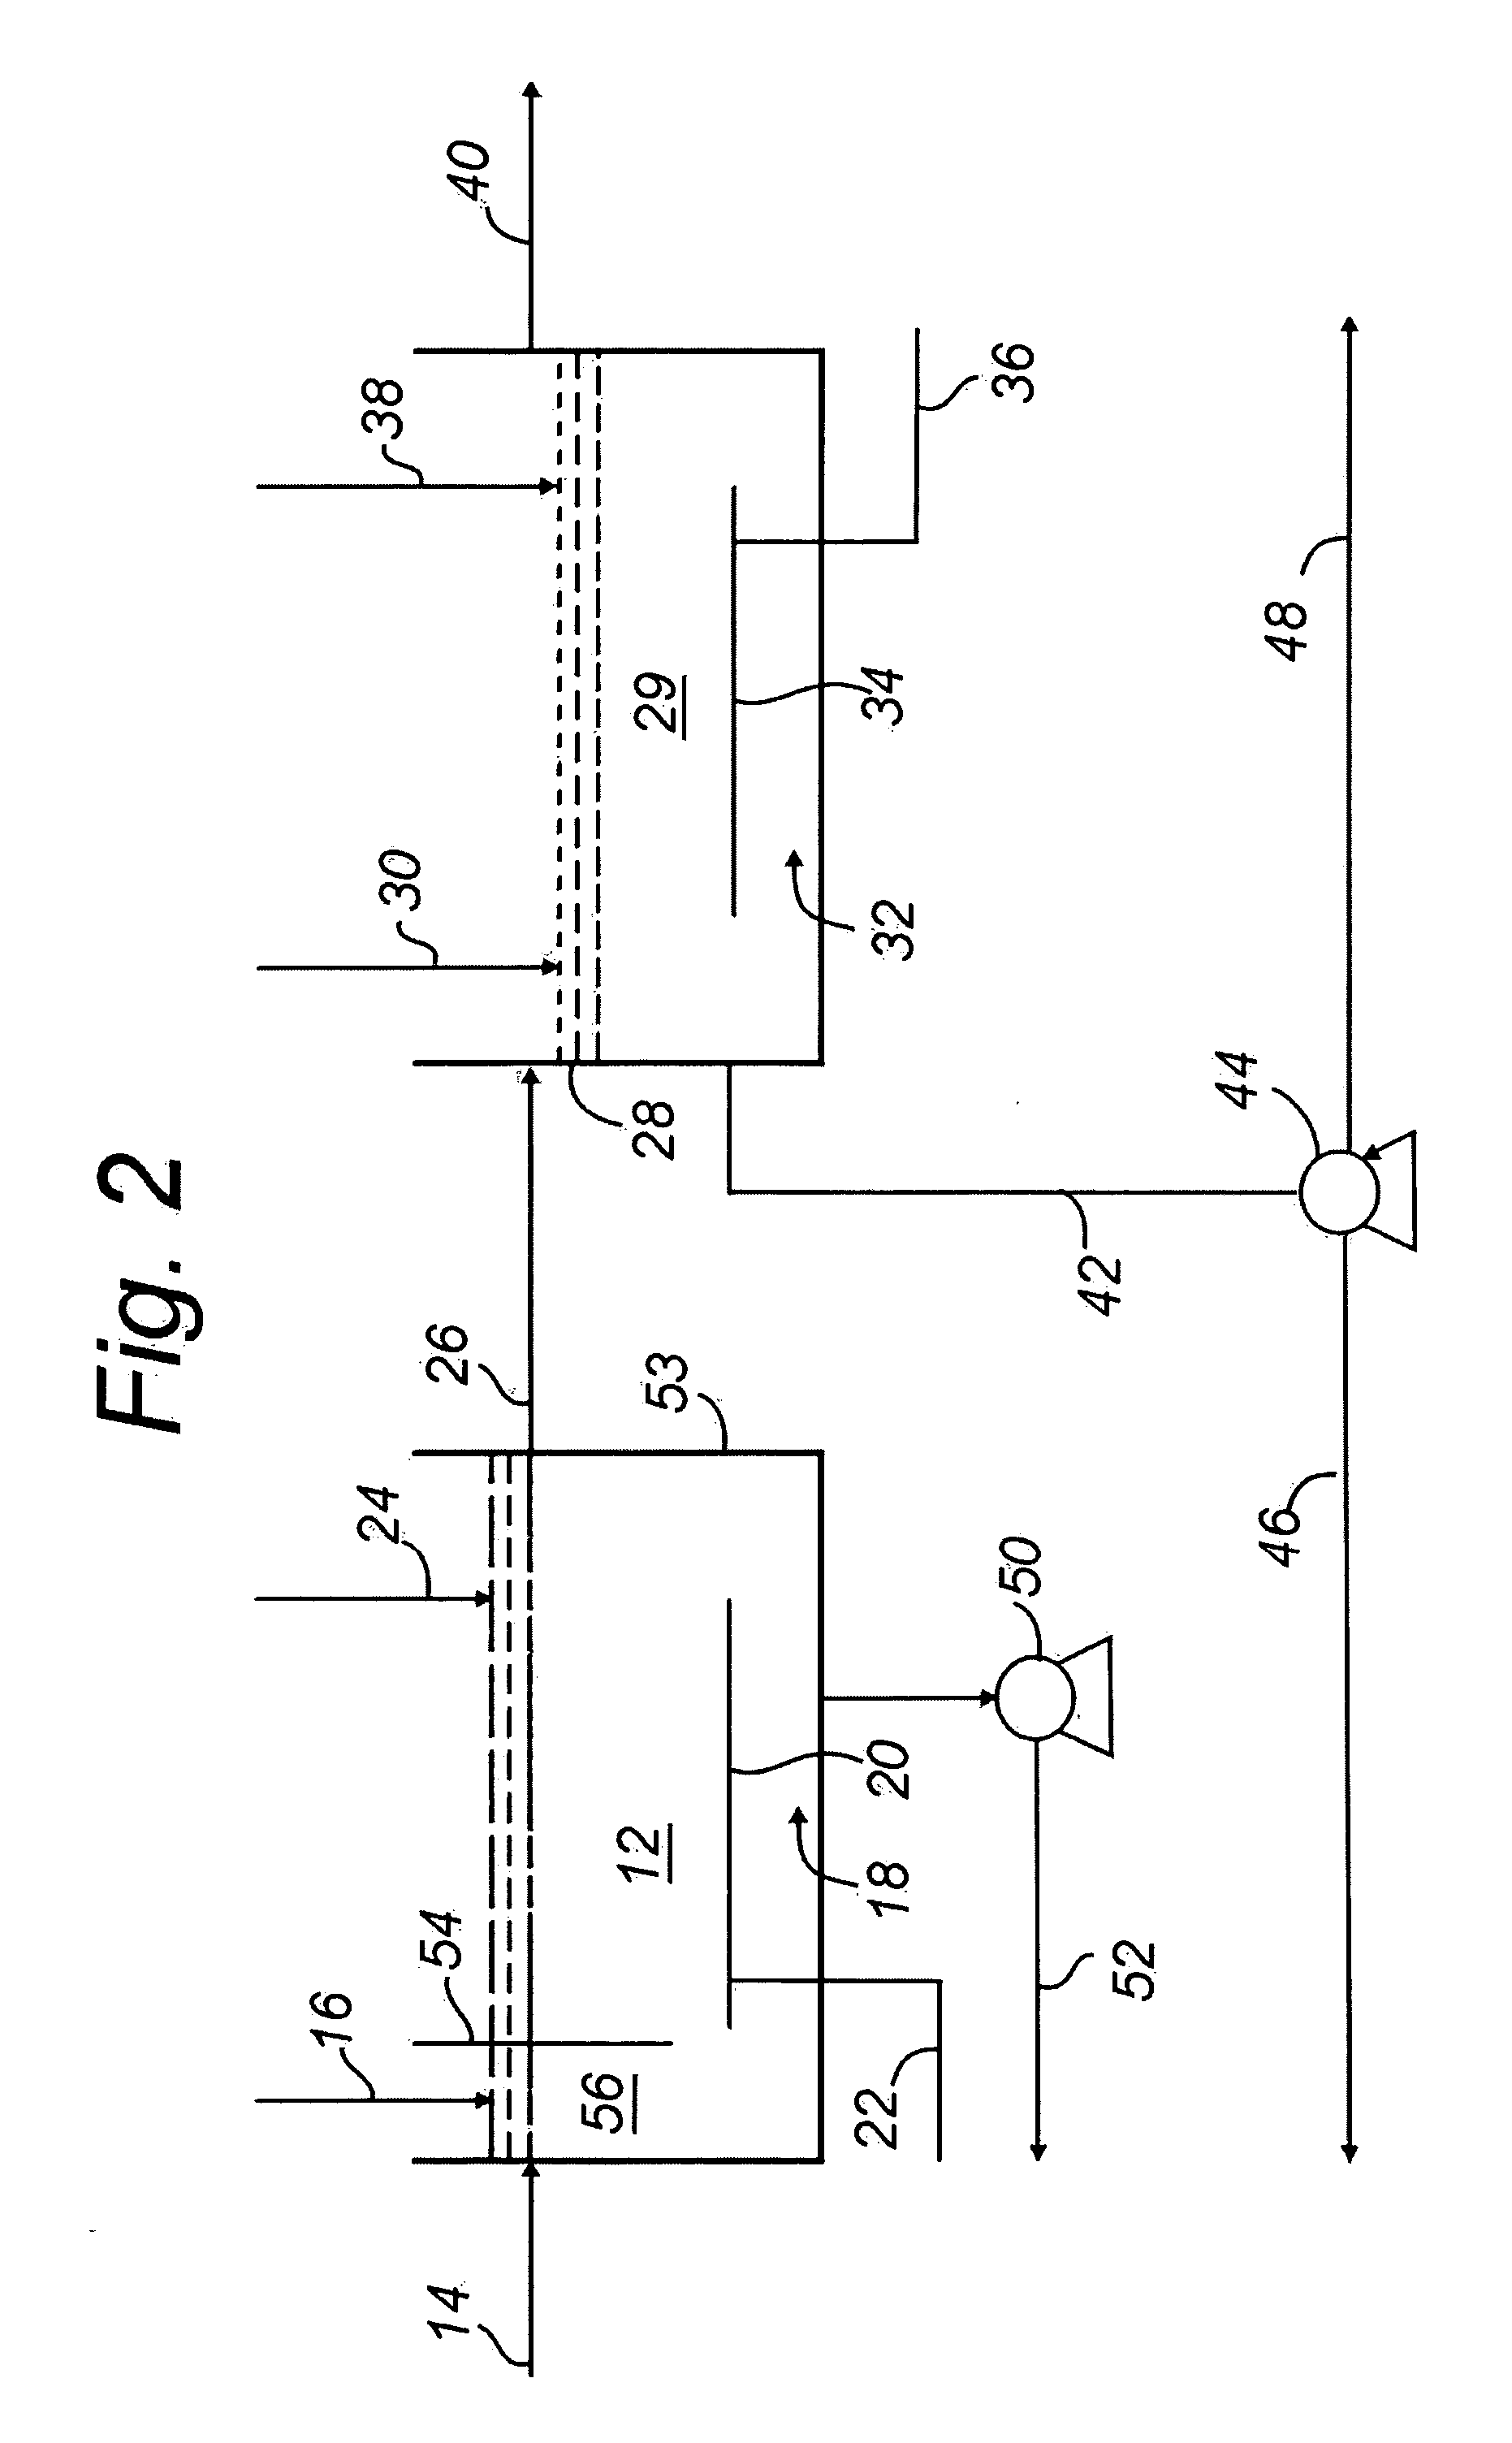 Methods for treatment of wastewater with powdered natural lignocellulosic material